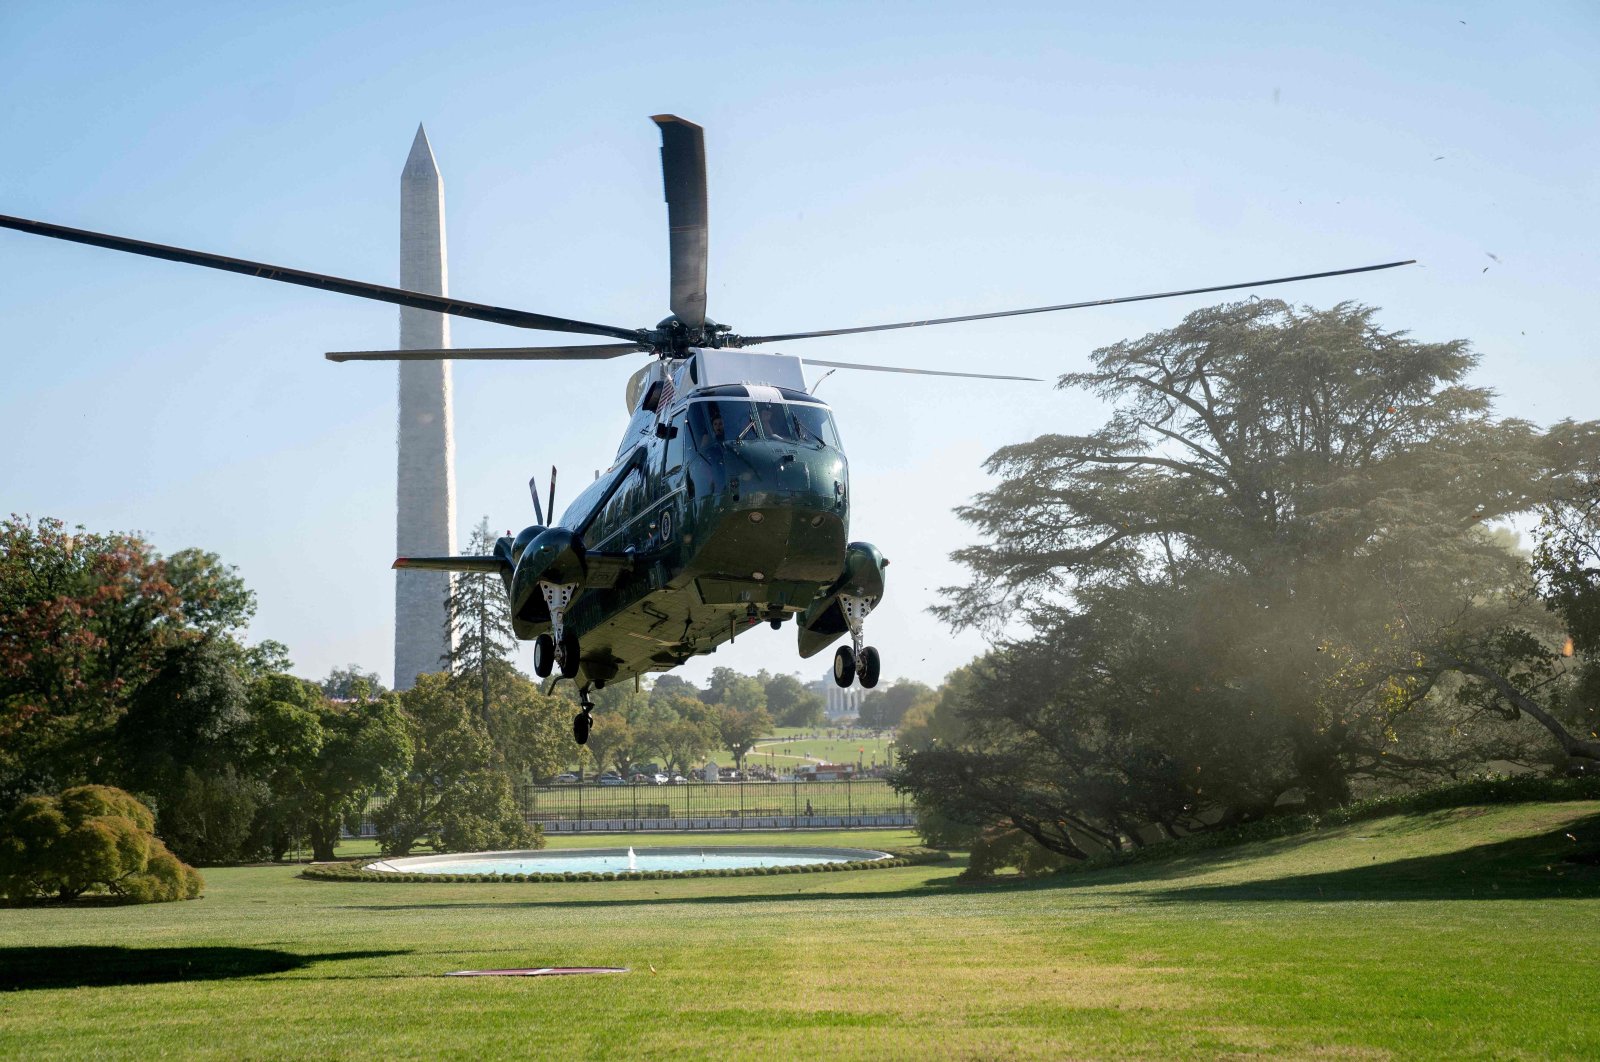 Pollen from a tree is swept through the air as Marine One, with U.S. President Biden on board, approaches the South Lawn of the White House, Washington, D.C., U.S., Oct. 10, 2022. (AFP Photo)